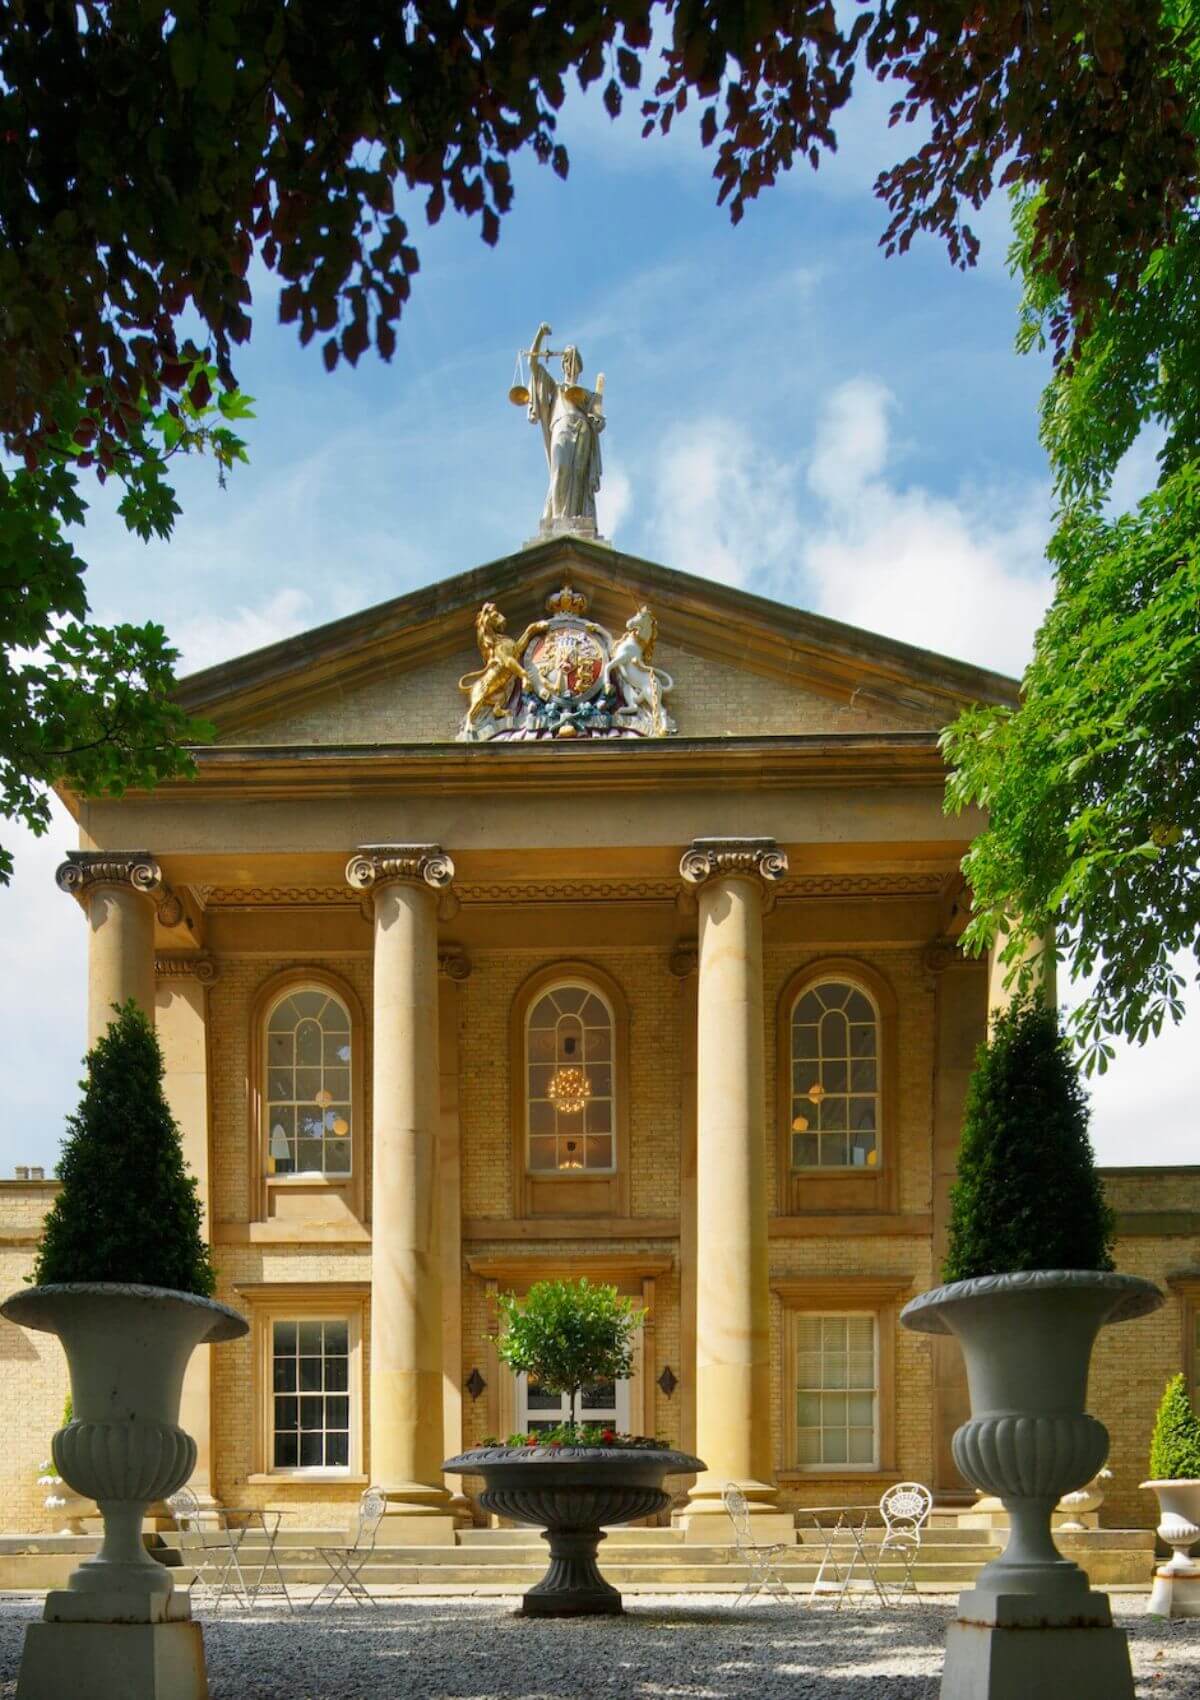 Day spa at Sessions House, Beverley, Yorkshire